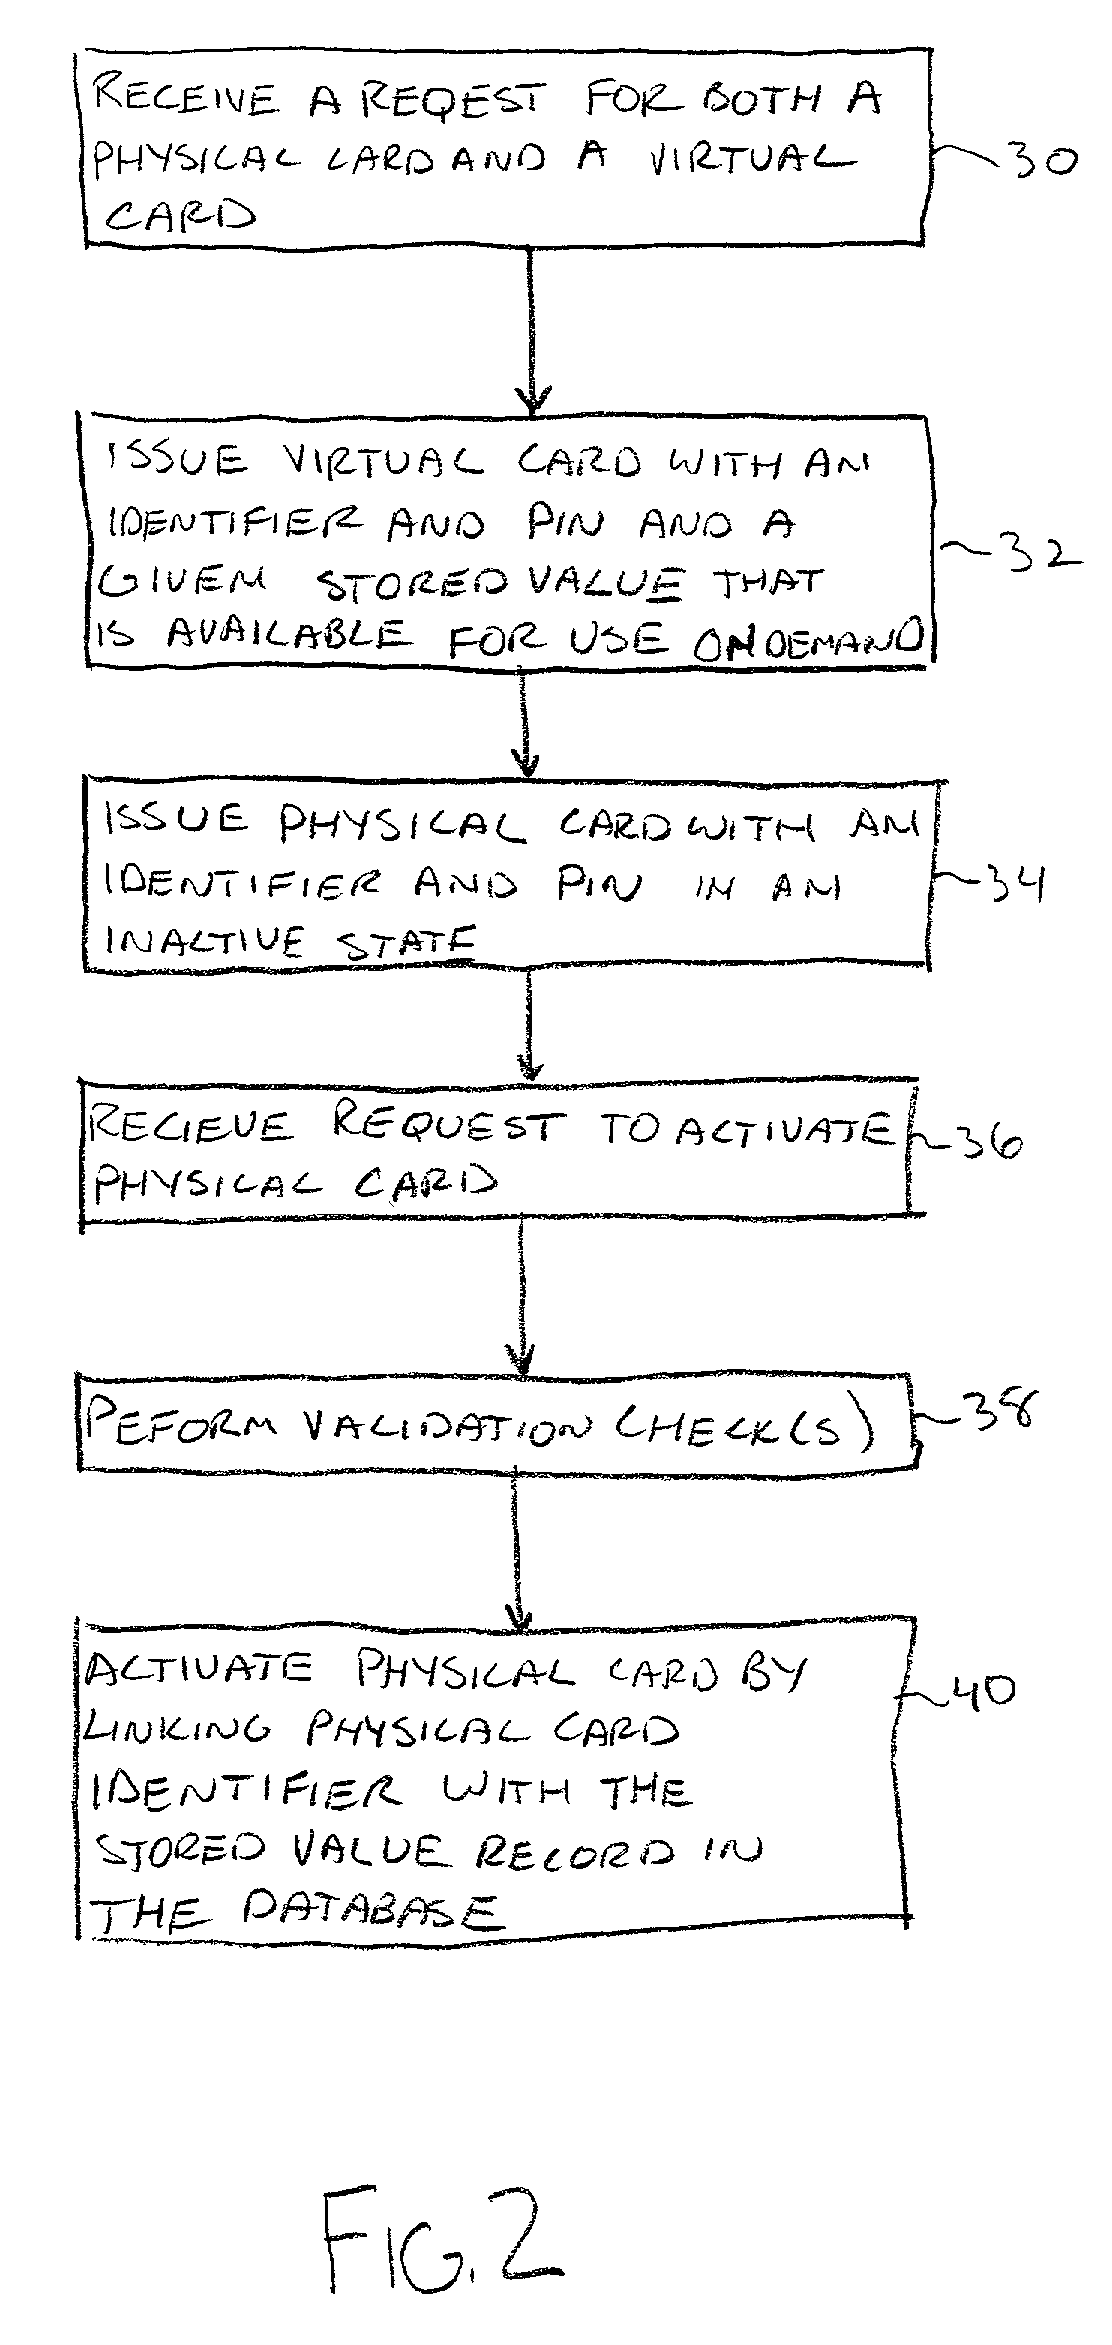 Stored value cards and methods for their issuance